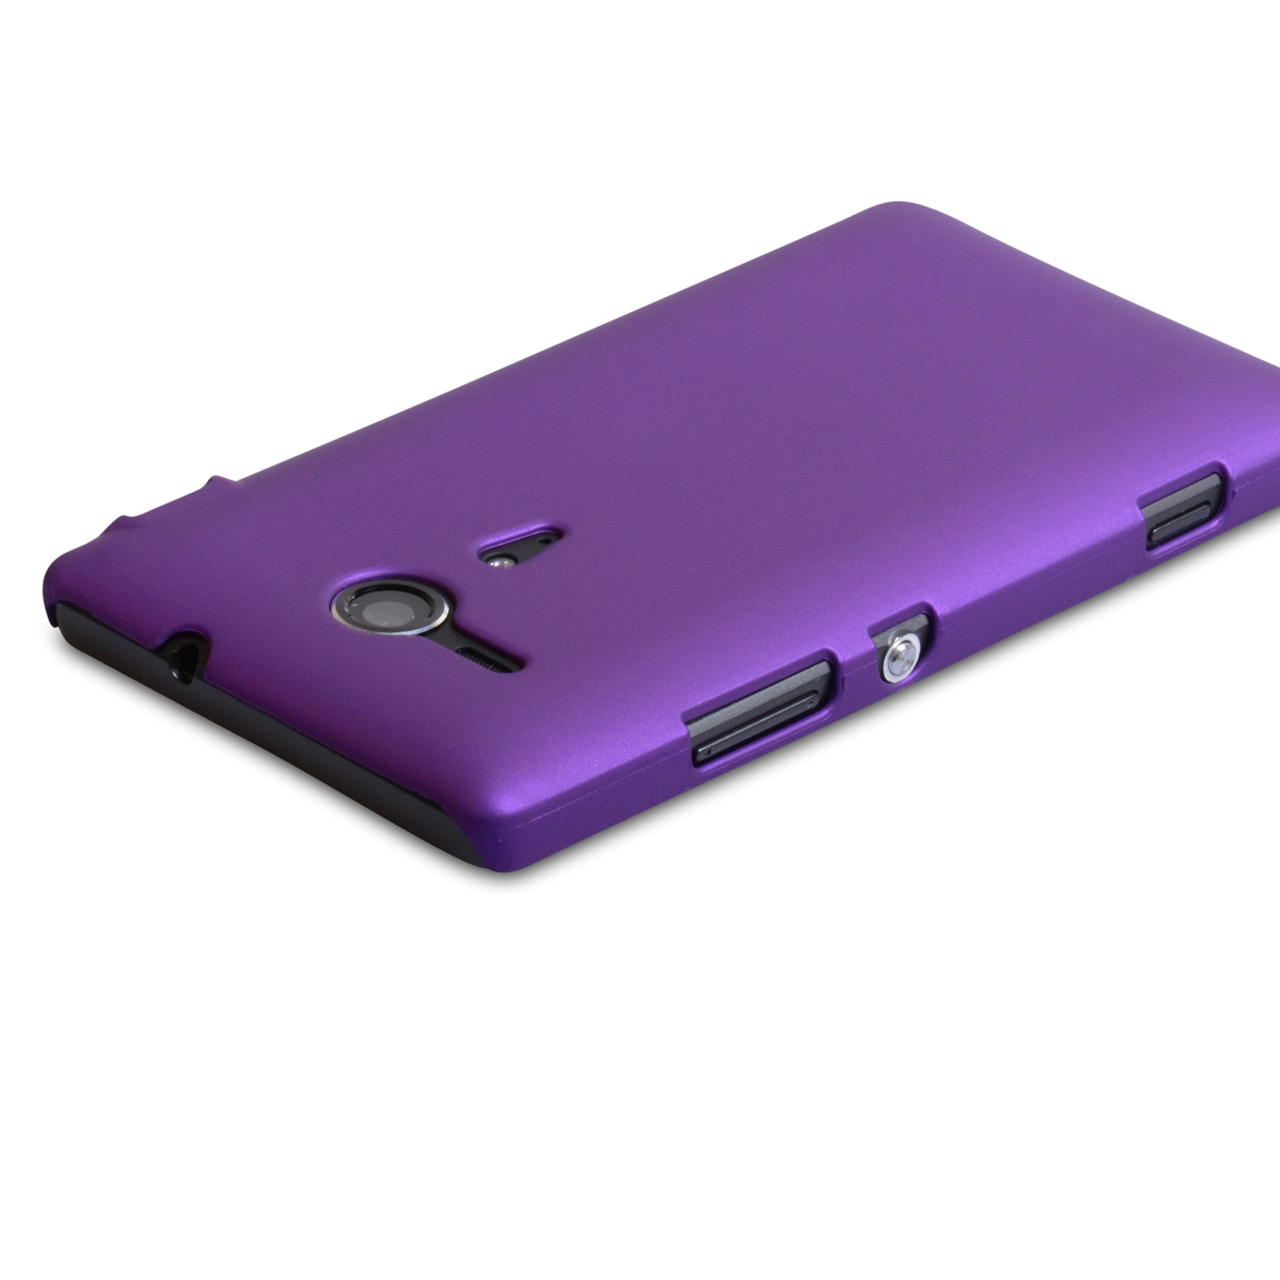 YouSave Accessories Sony Xperia SP Hard Hybrid Case - Purple